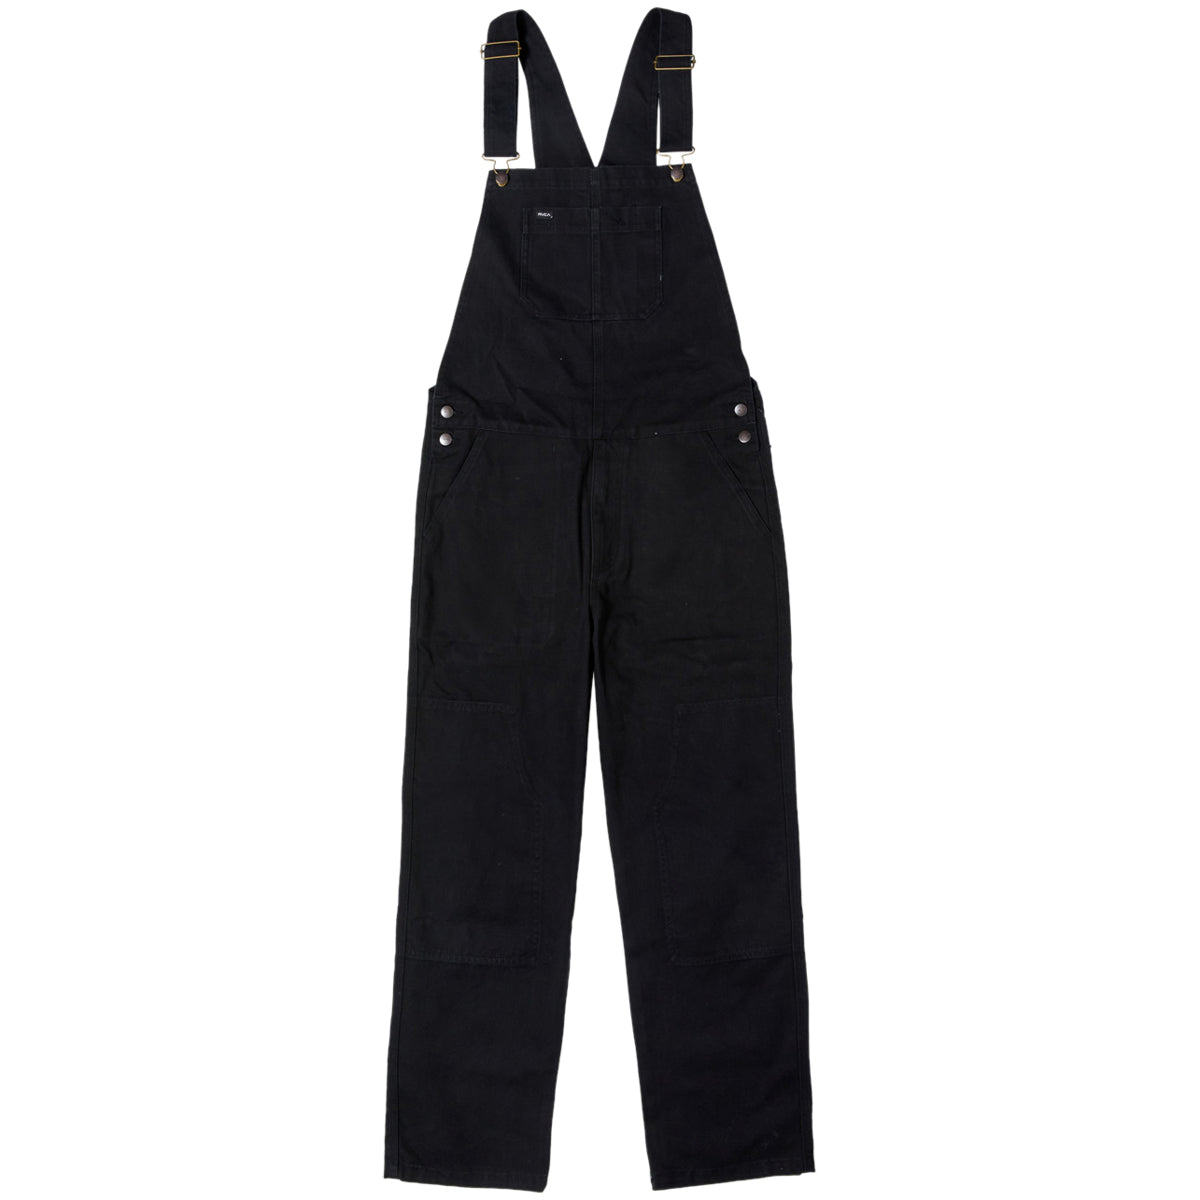 RVCA Chainmail Overall Pants - Rvca Black image 1